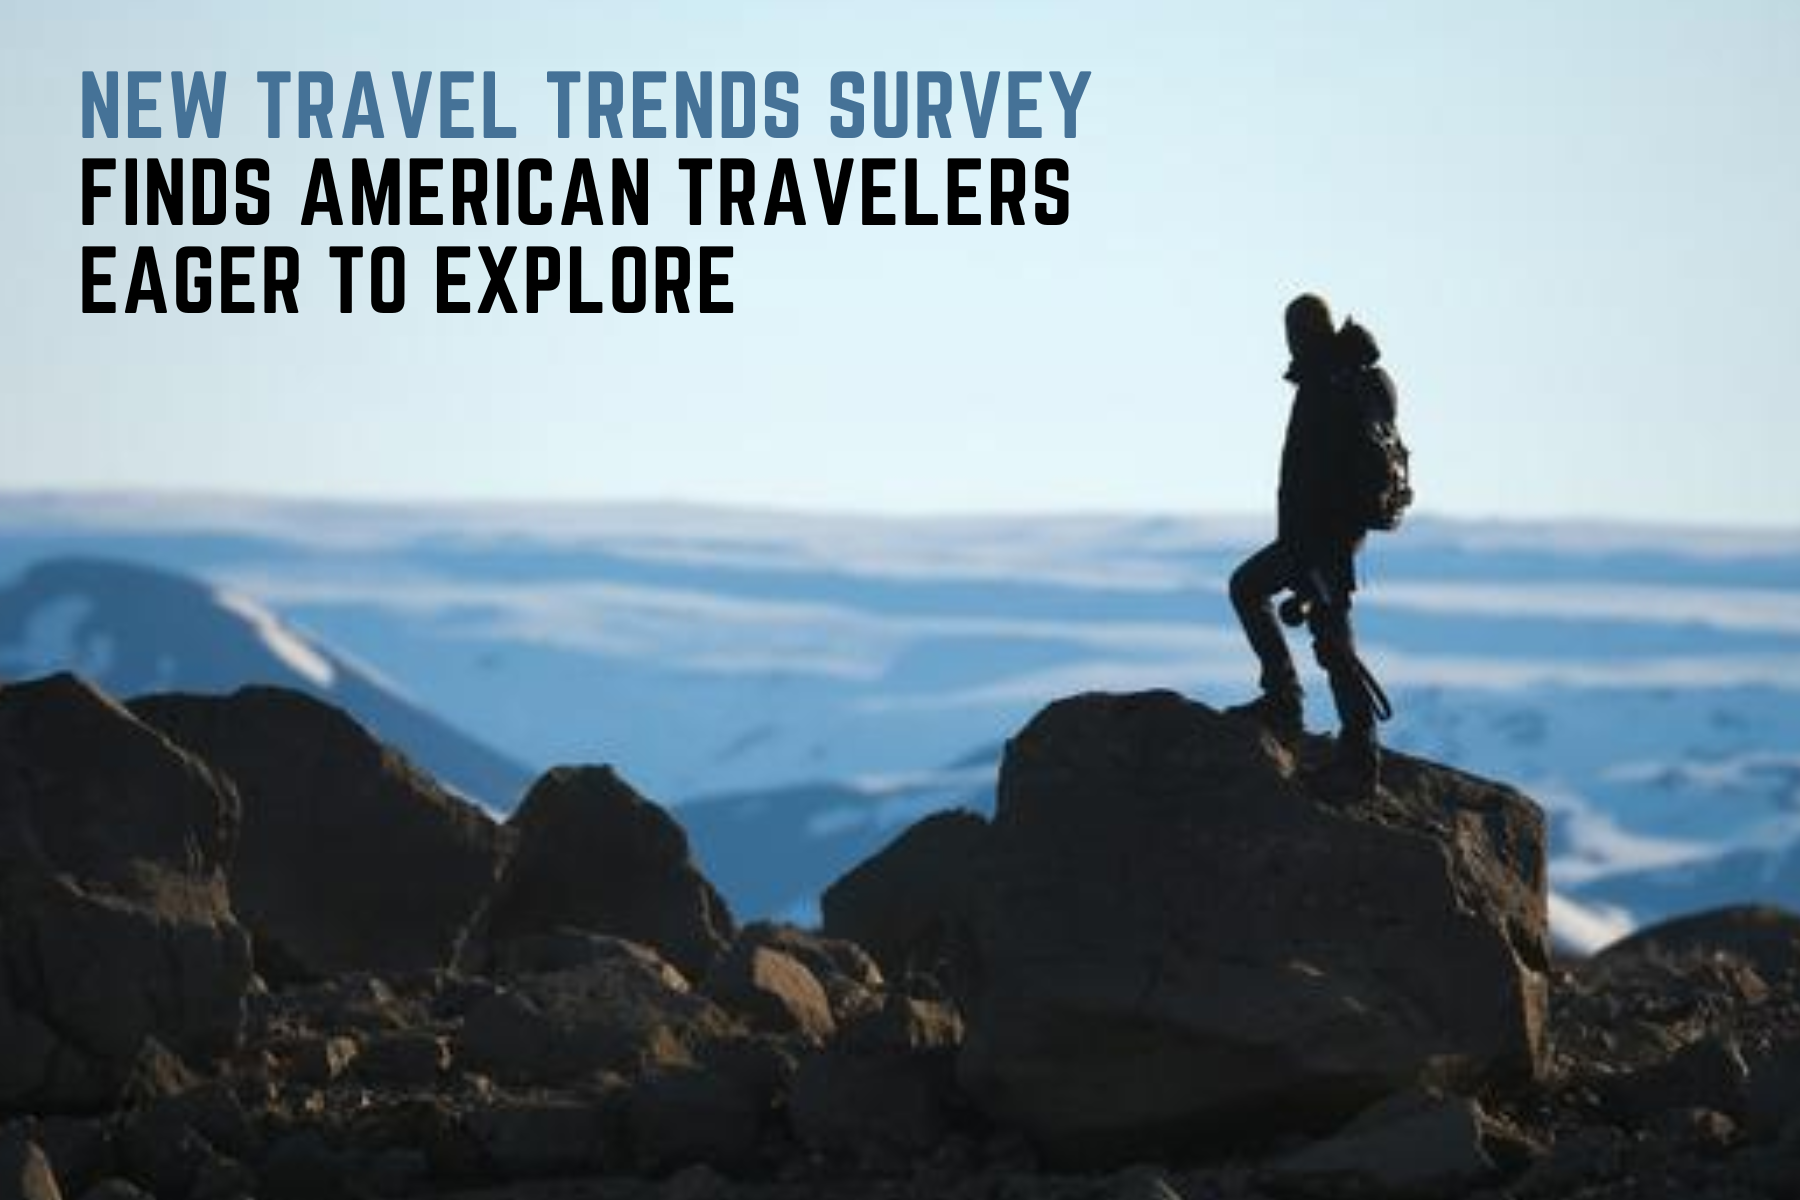 New Travel Trends Survey Finds American Travelers Eager To Explore